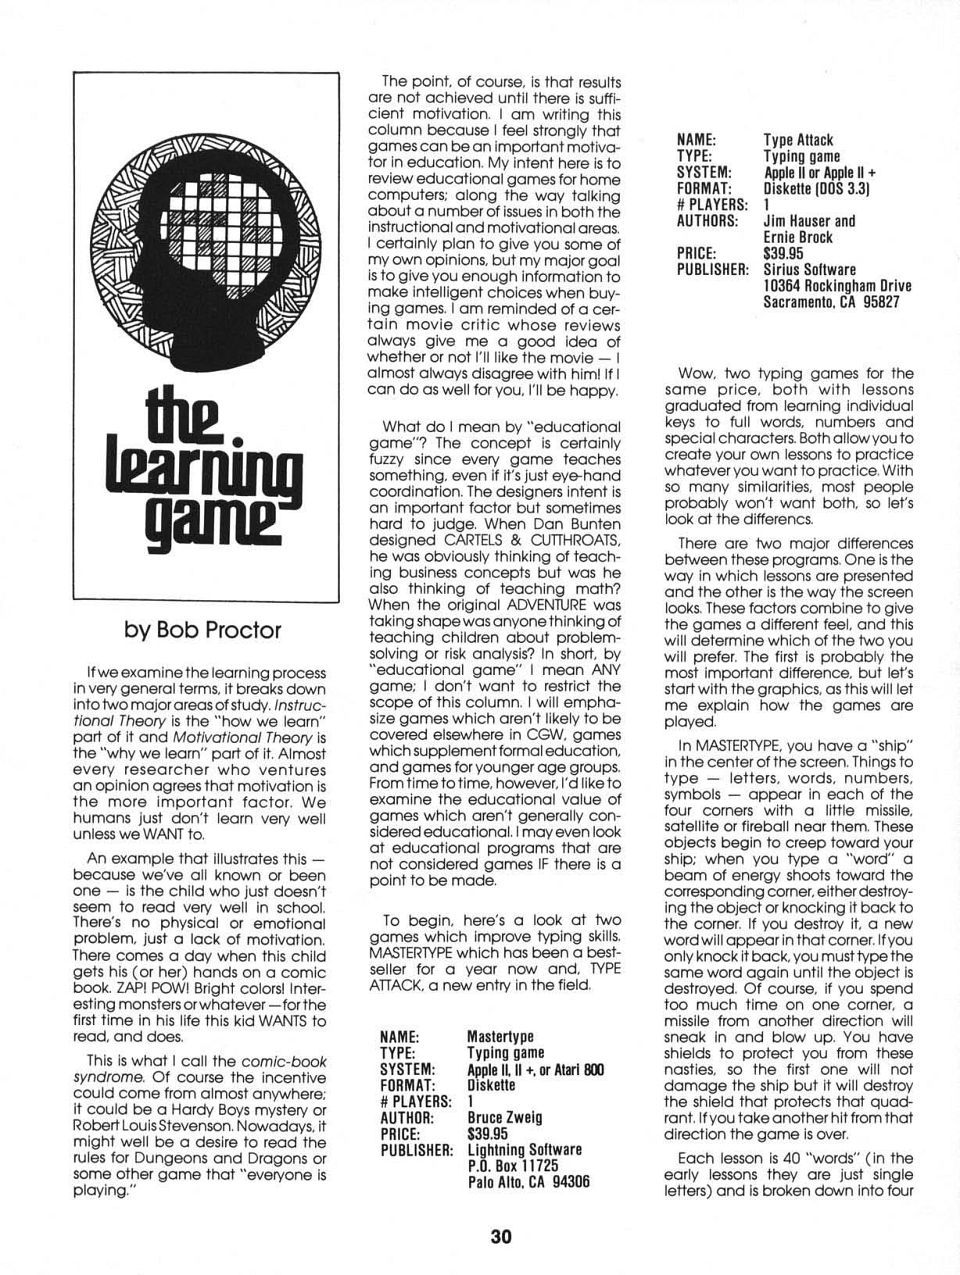 The Learning Game: Mastertype